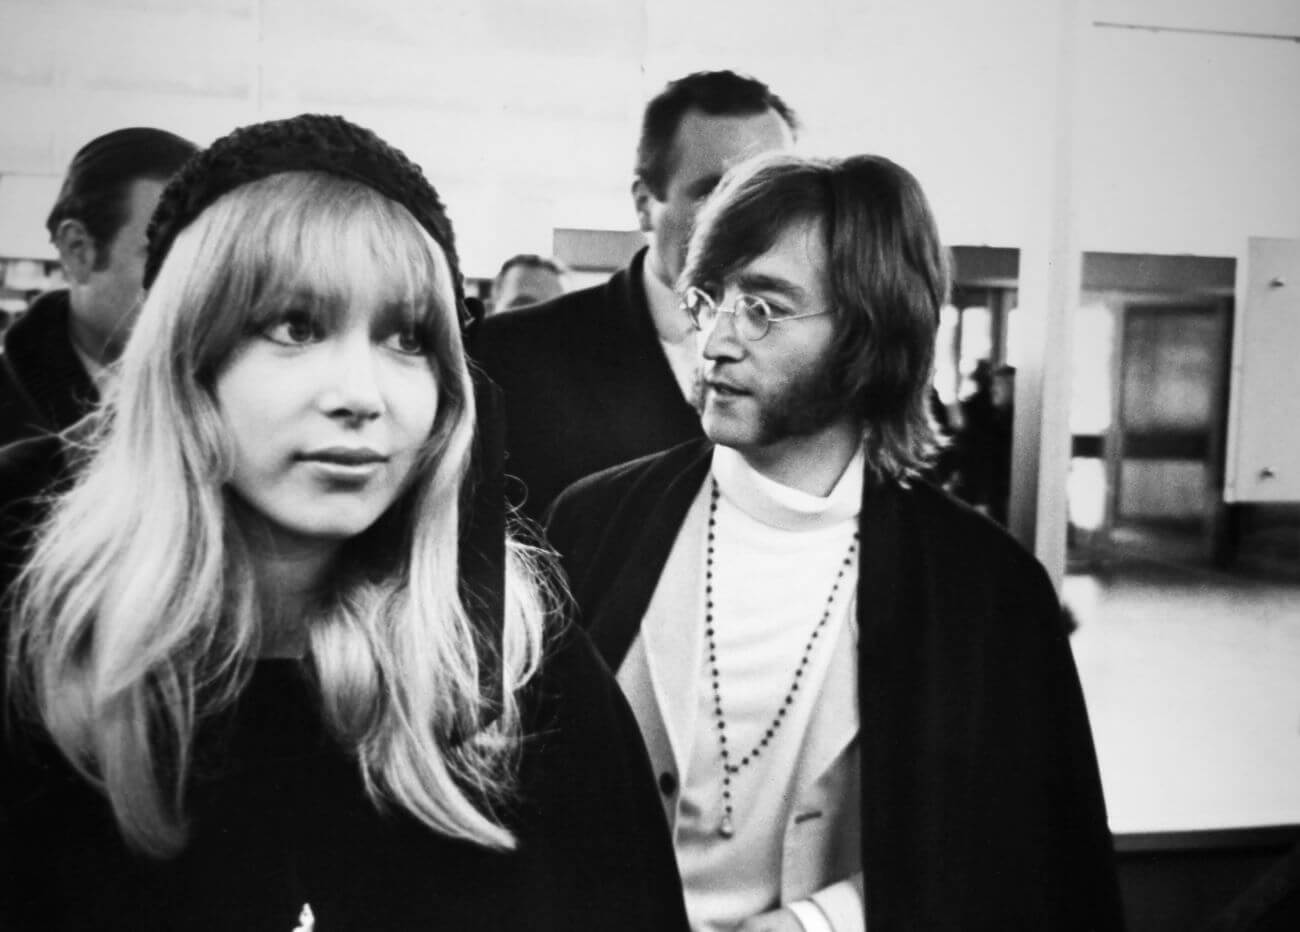 A black and white picture of Pattie Boyd wearing a hat and walking slightly ahead of John Lennon.